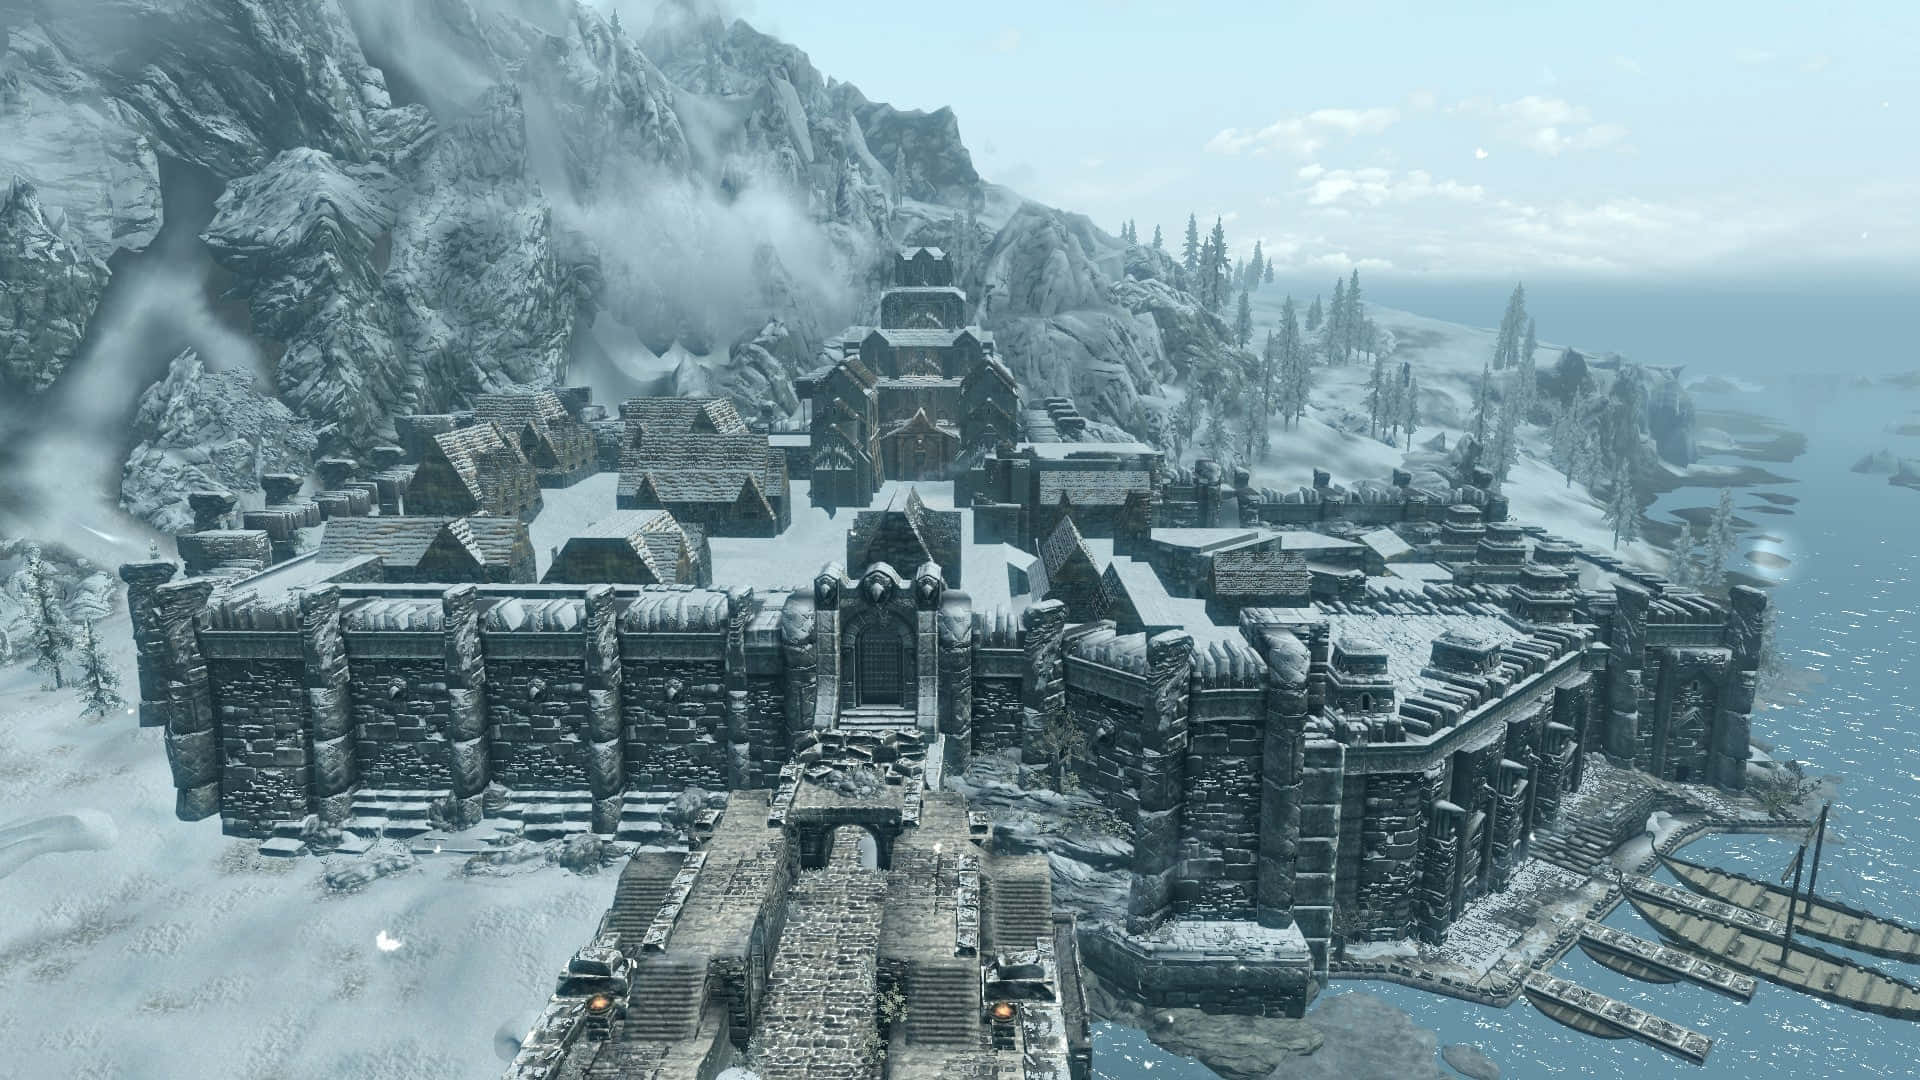 Majestic Skyrim Windhelm in the Snow Wallpaper